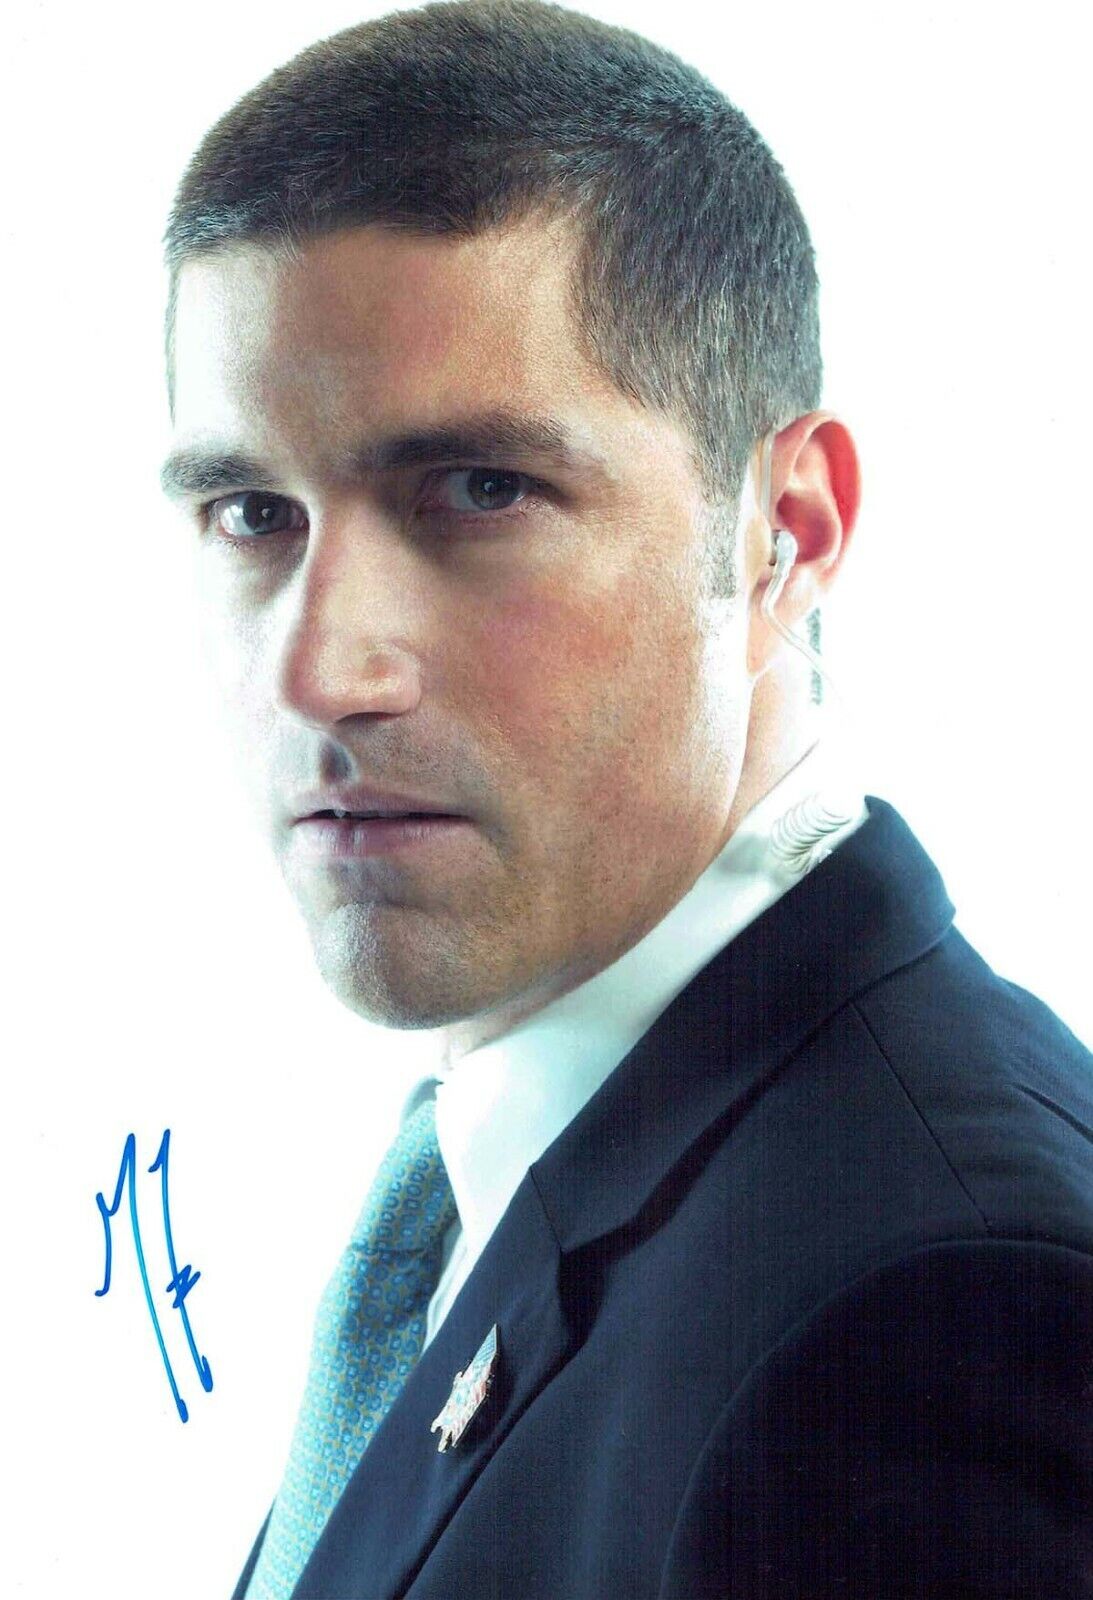 MATTHEW FOX Signed Autograph 12x8 Photo Poster painting AFTAL COA LOST Actor Jack HAND